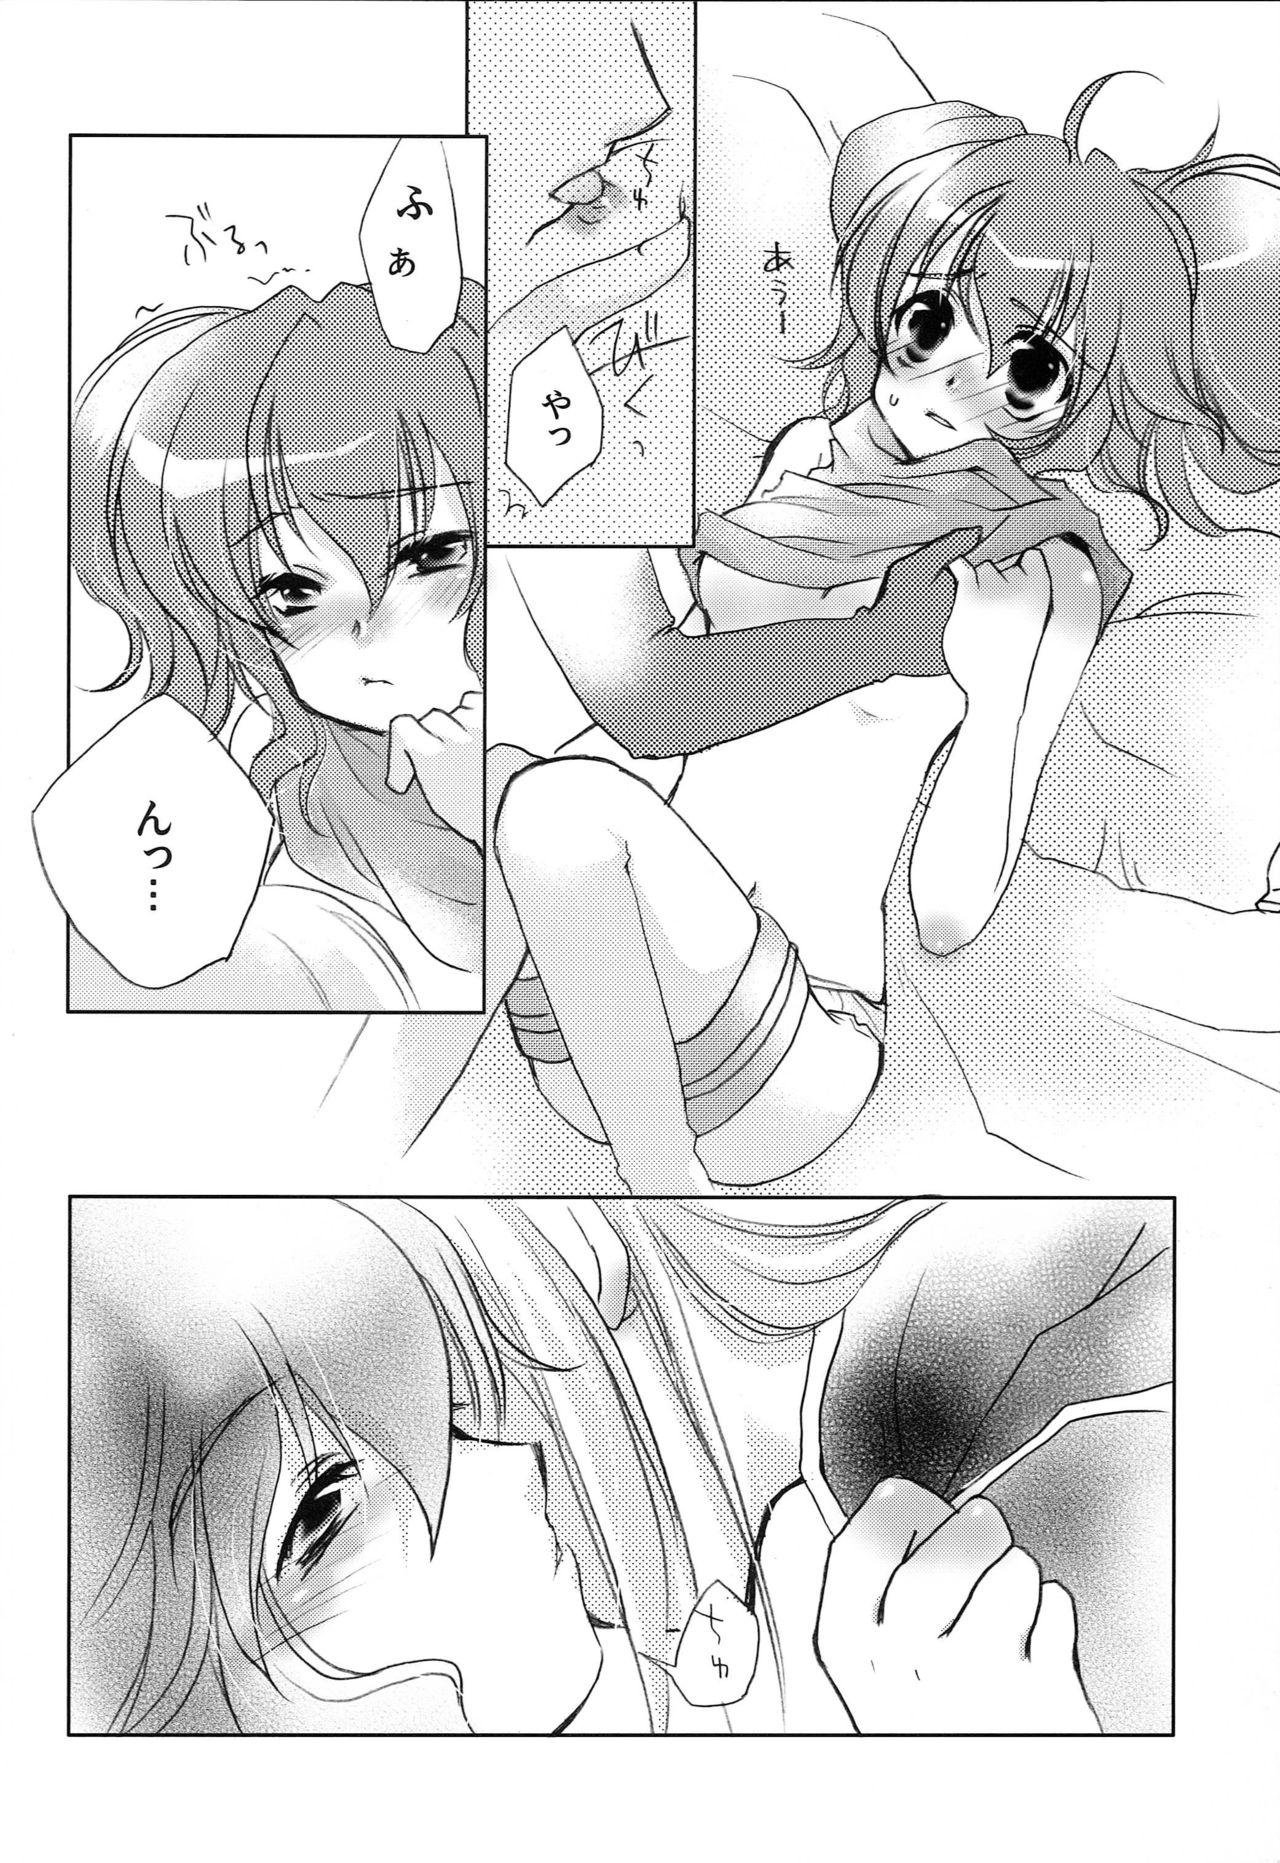 Latin Carnation, Lily, Lily, Rose - Tales of the abyss Porn - Page 9